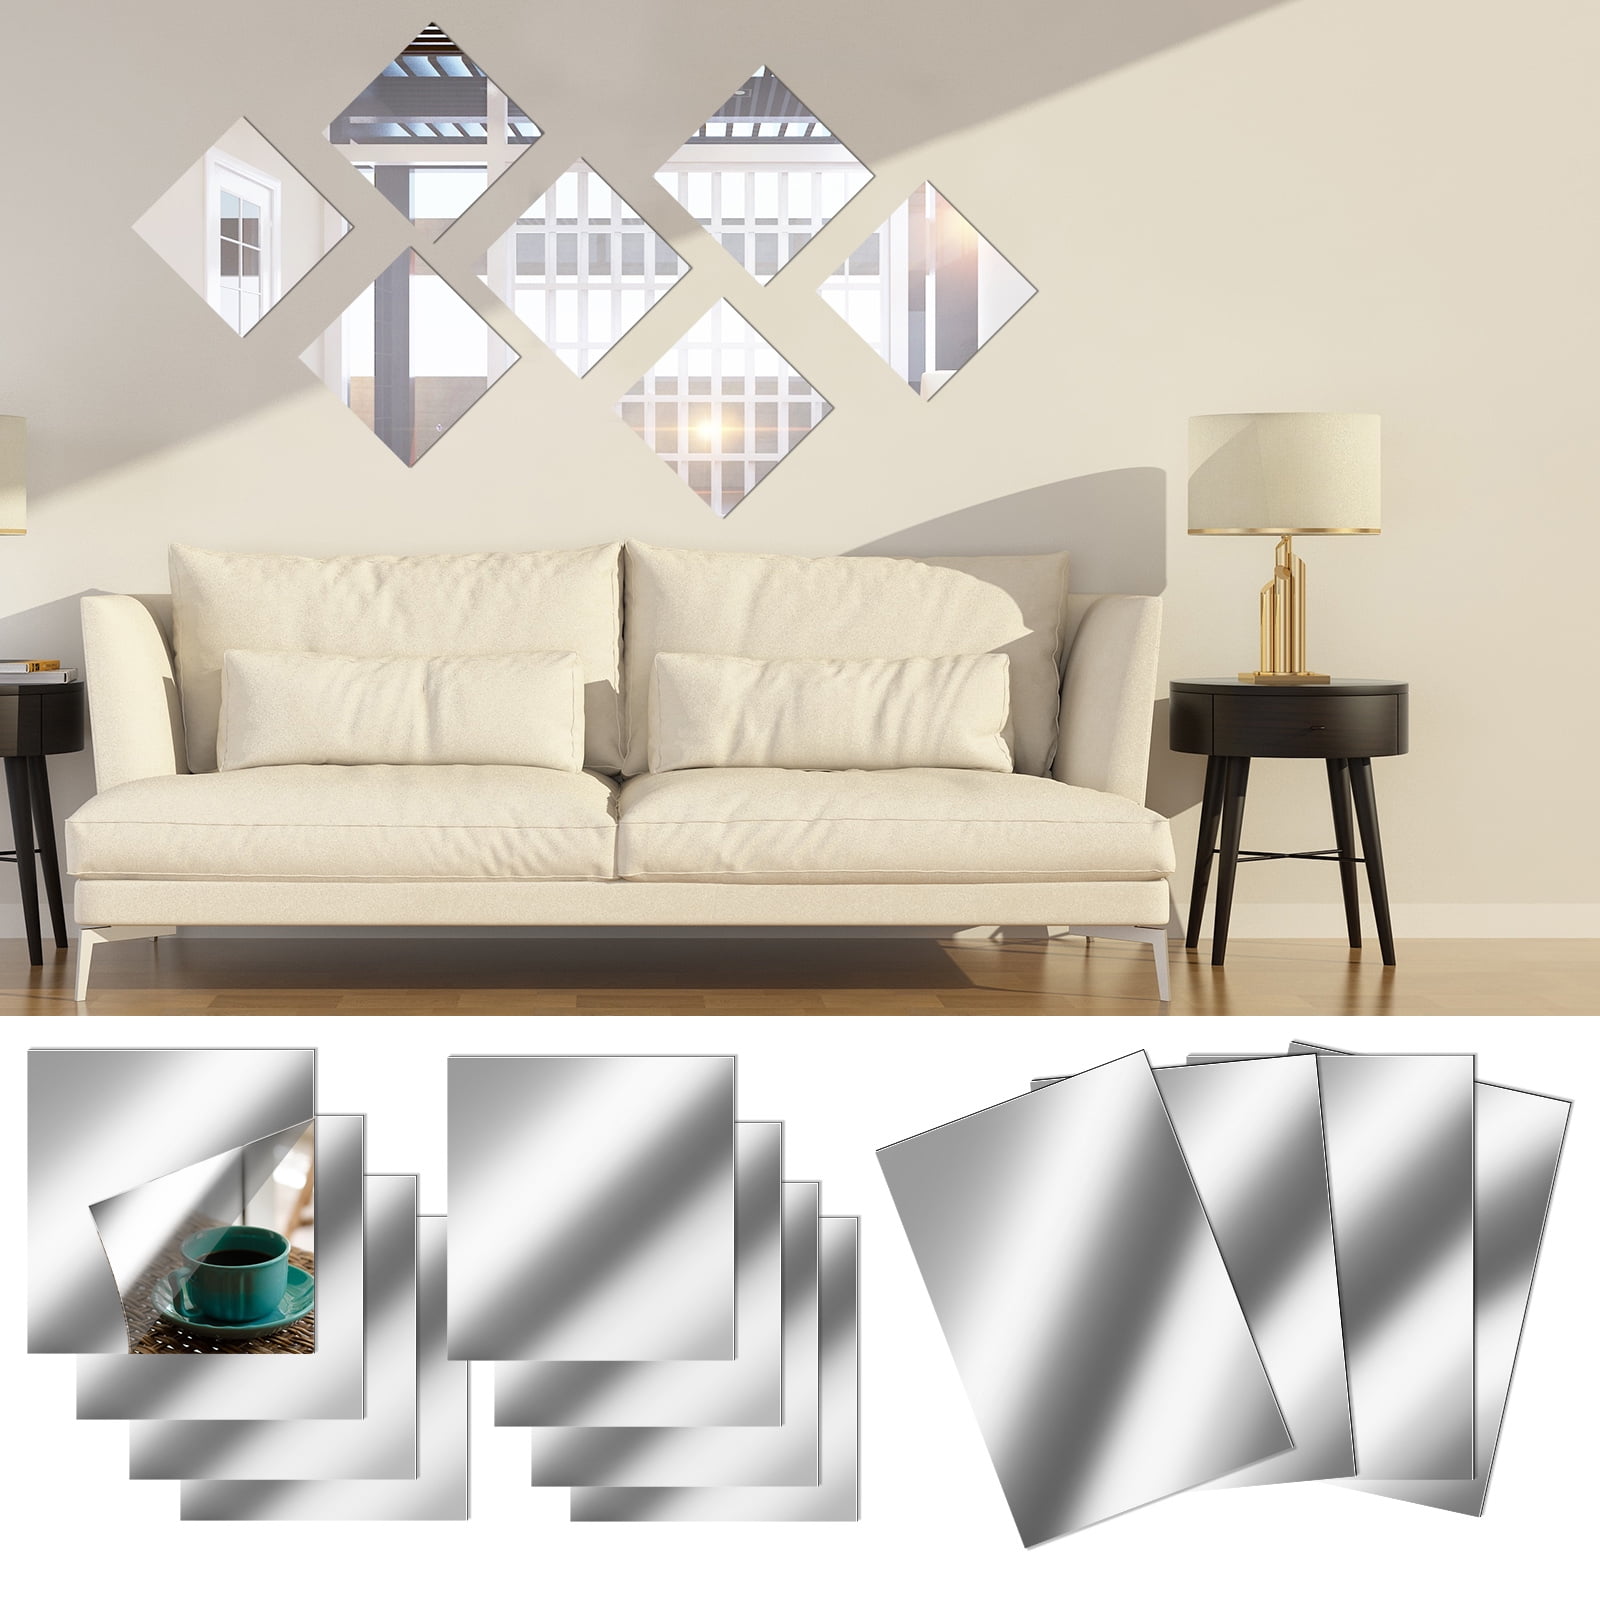 Non-Glass Mirror Wall Stickers Self-adhesive Tiles Flexible Looking 3D Stickers 